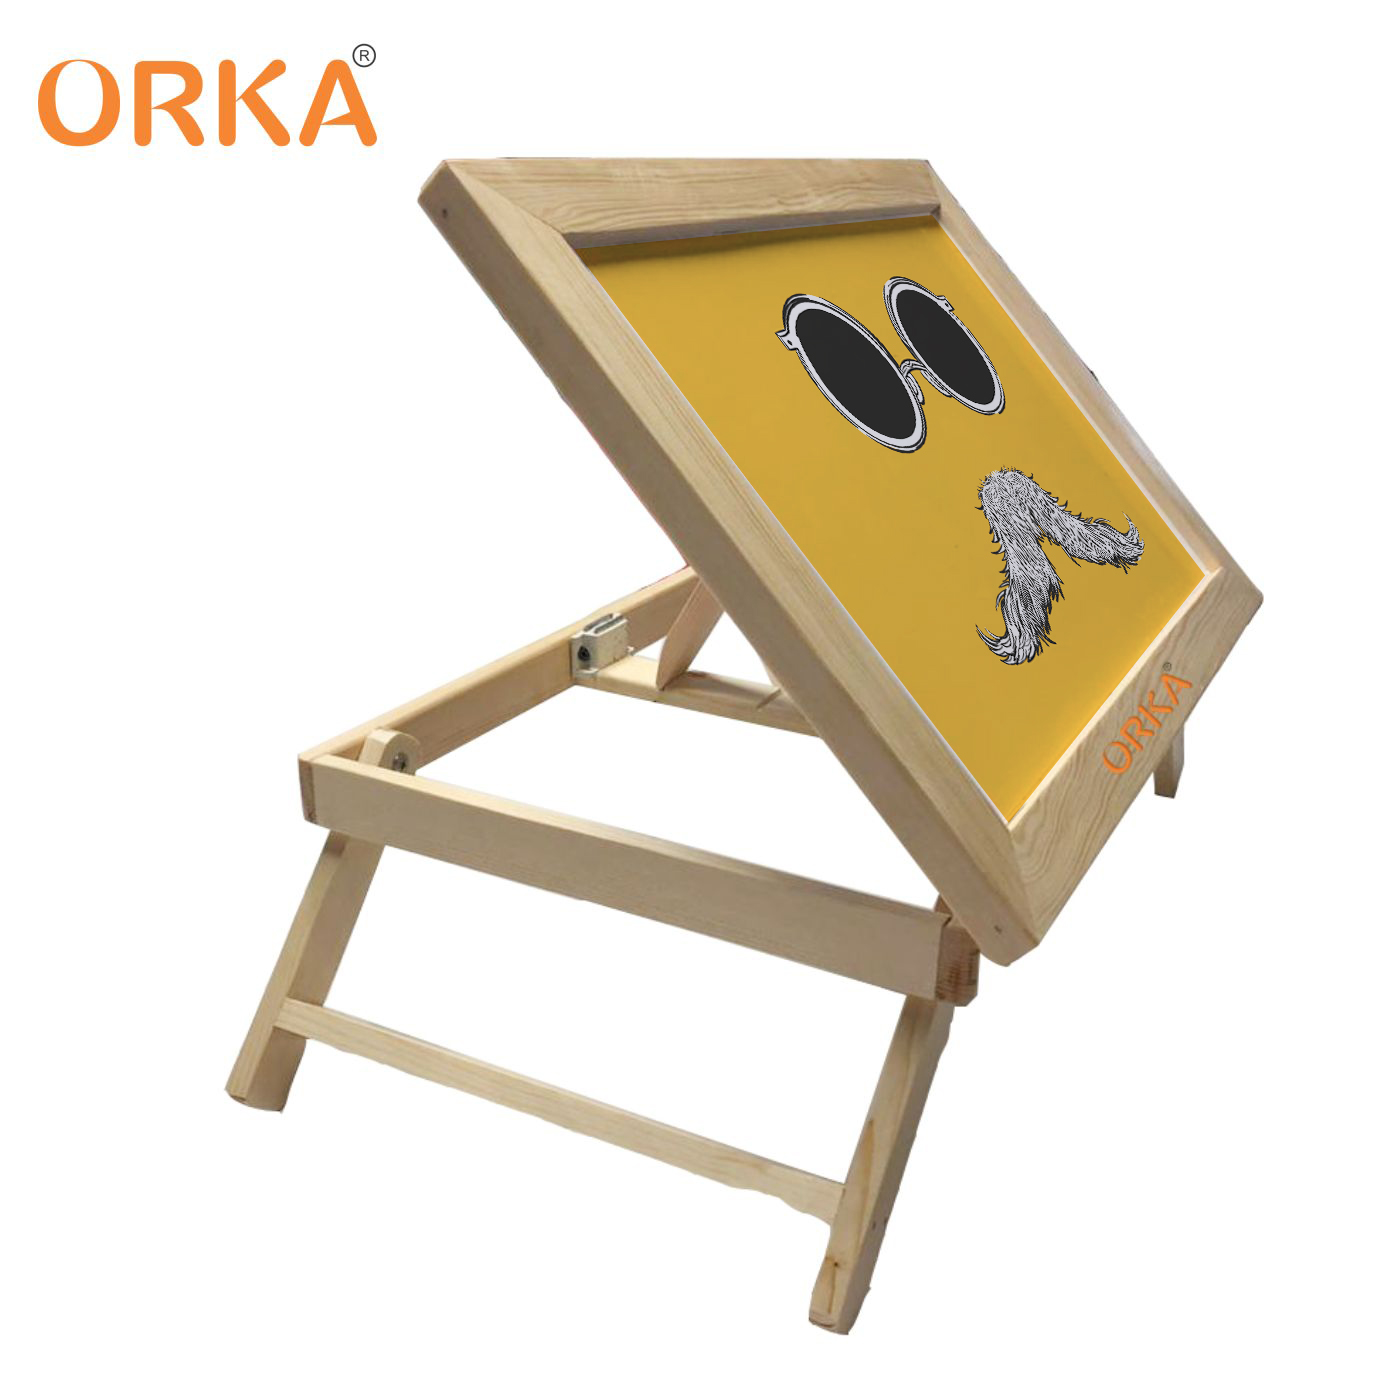 ORKA Mustache Foldable Multi-Function Portable Laptop Table - Yellow  